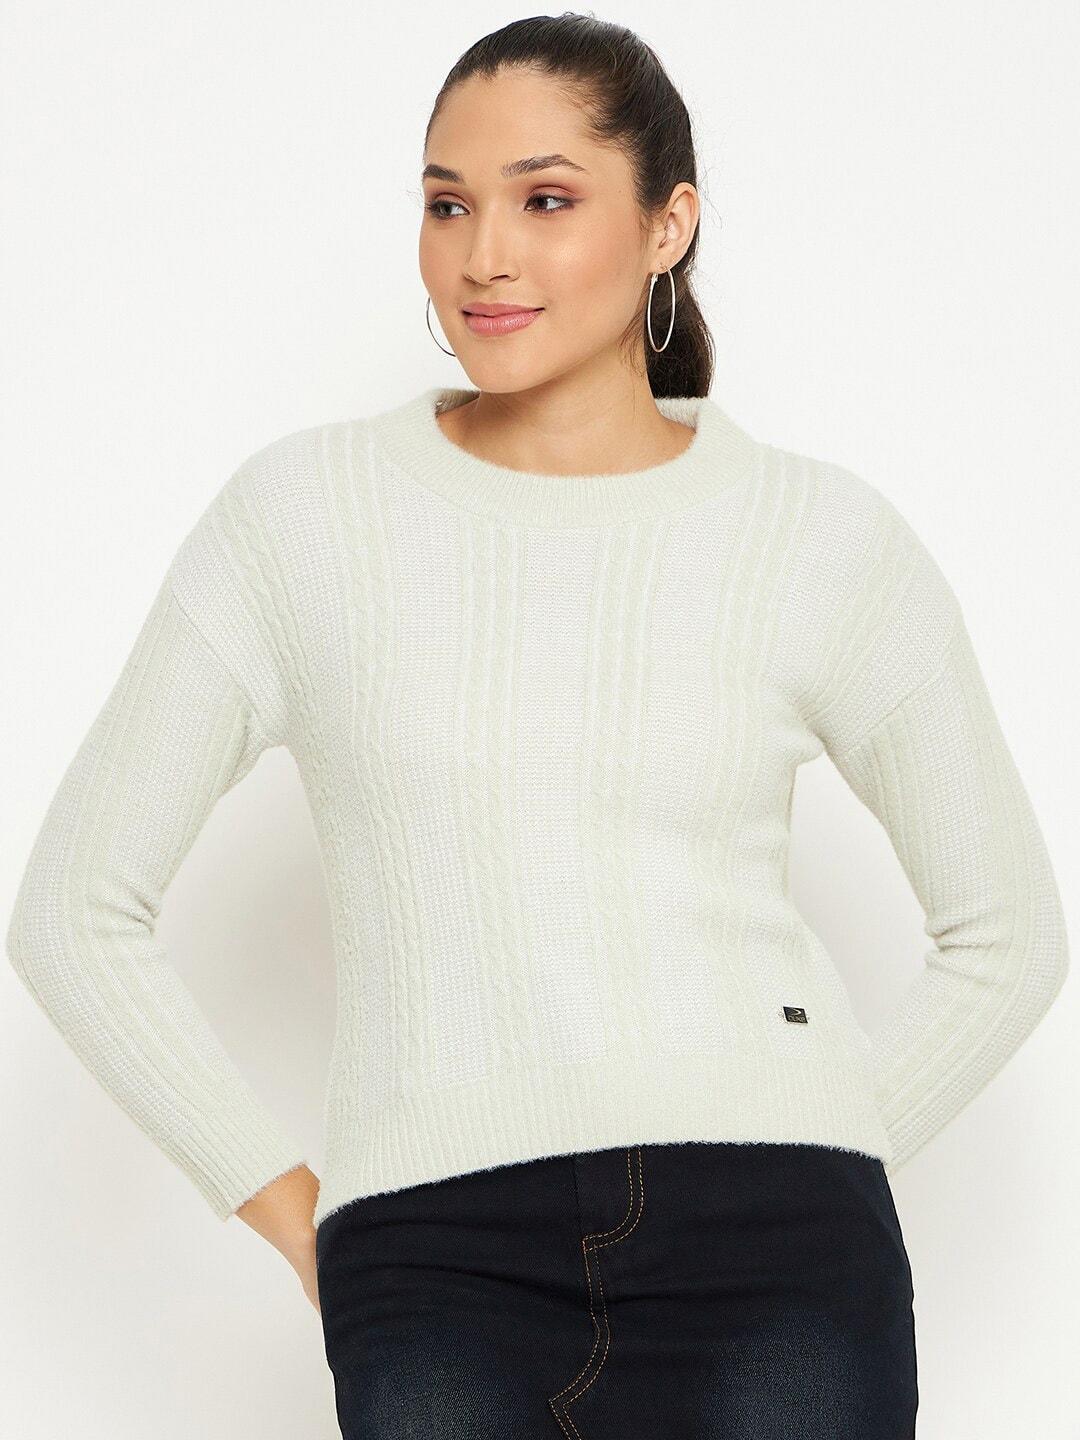 duke-cable-knit-acrylic-pullover